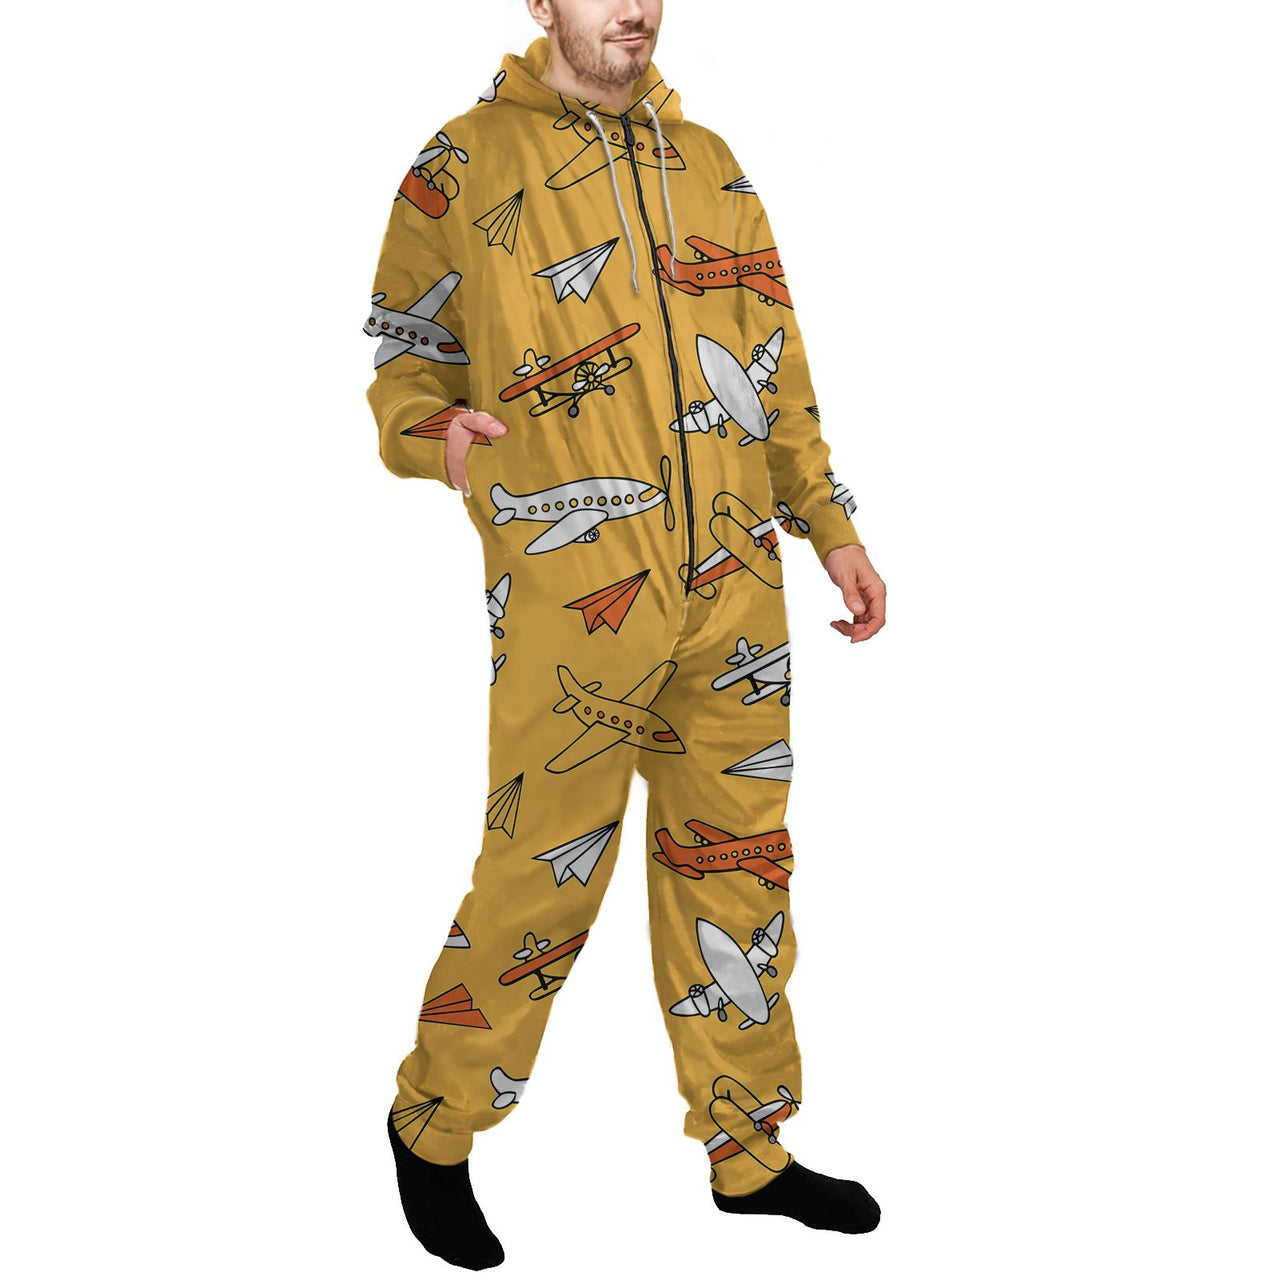 Super Drawings of Airplanes Designed Jumpsuit for Men & Women